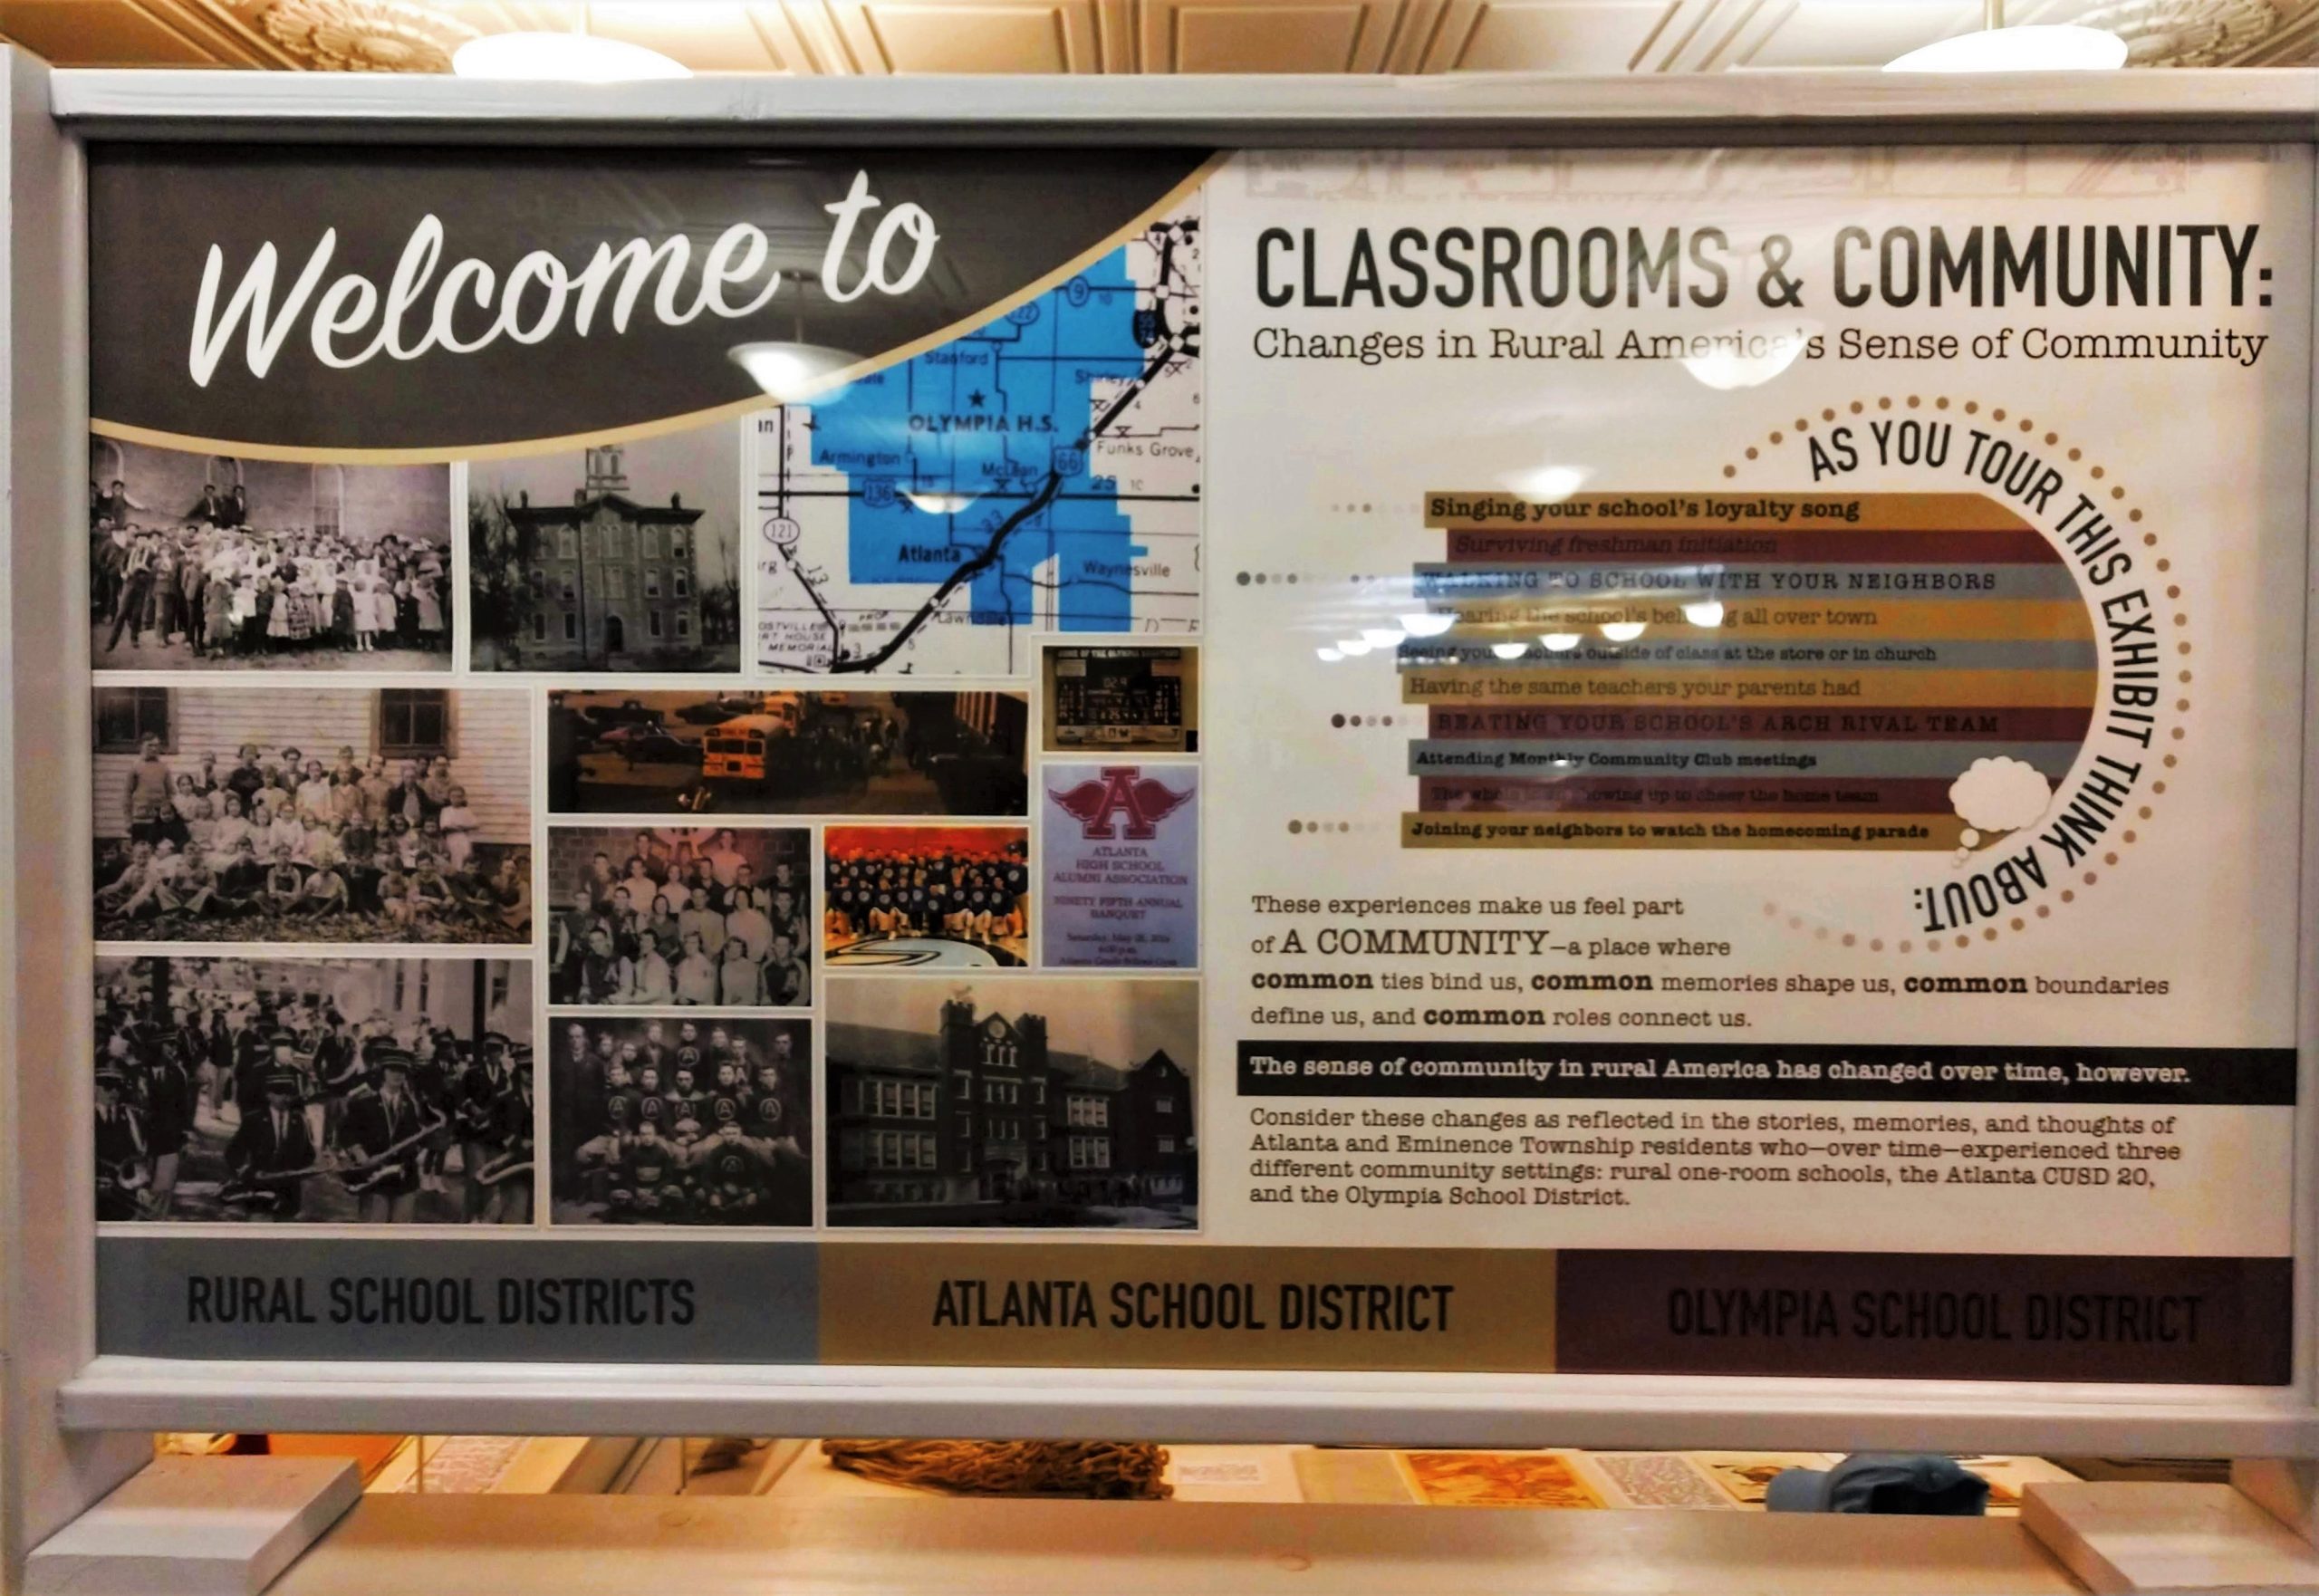 Photograph of a sign welcoming visitors to Atlanta Museum's companion exhibition, "Classrooms & Community".